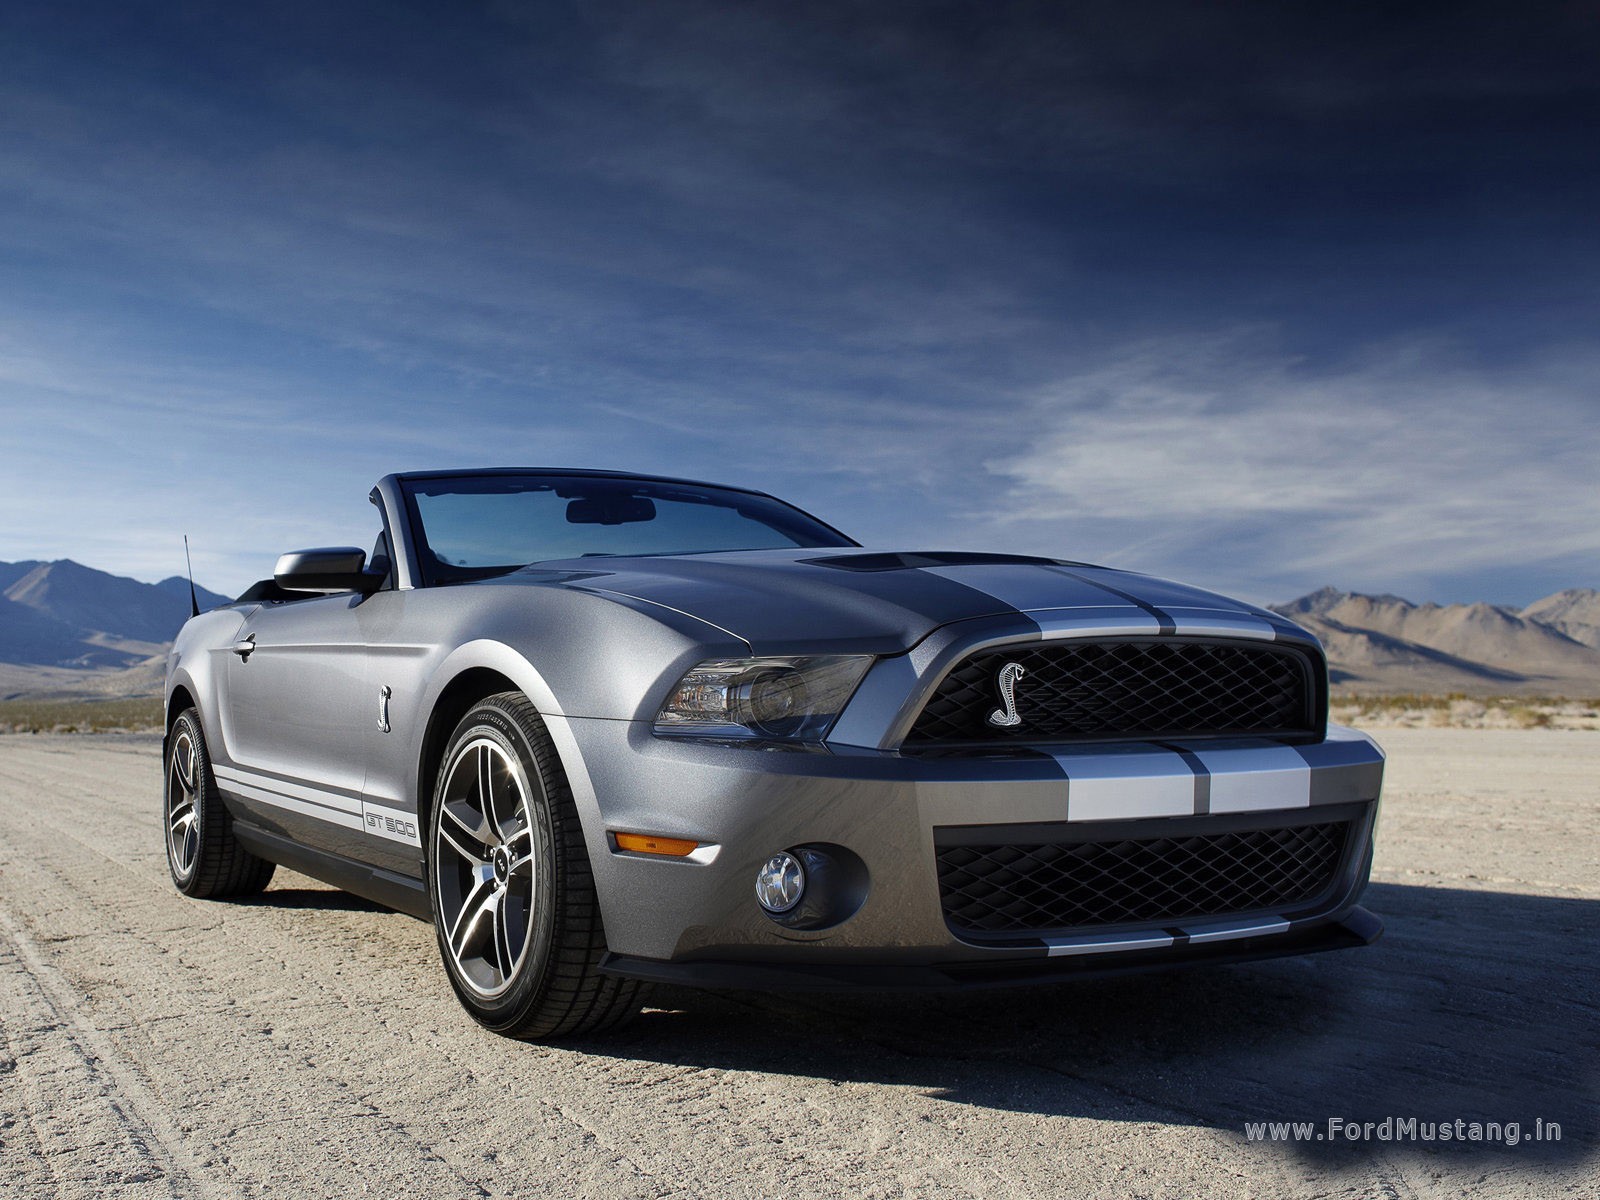 2010 Ford mustang shelby convertible #3